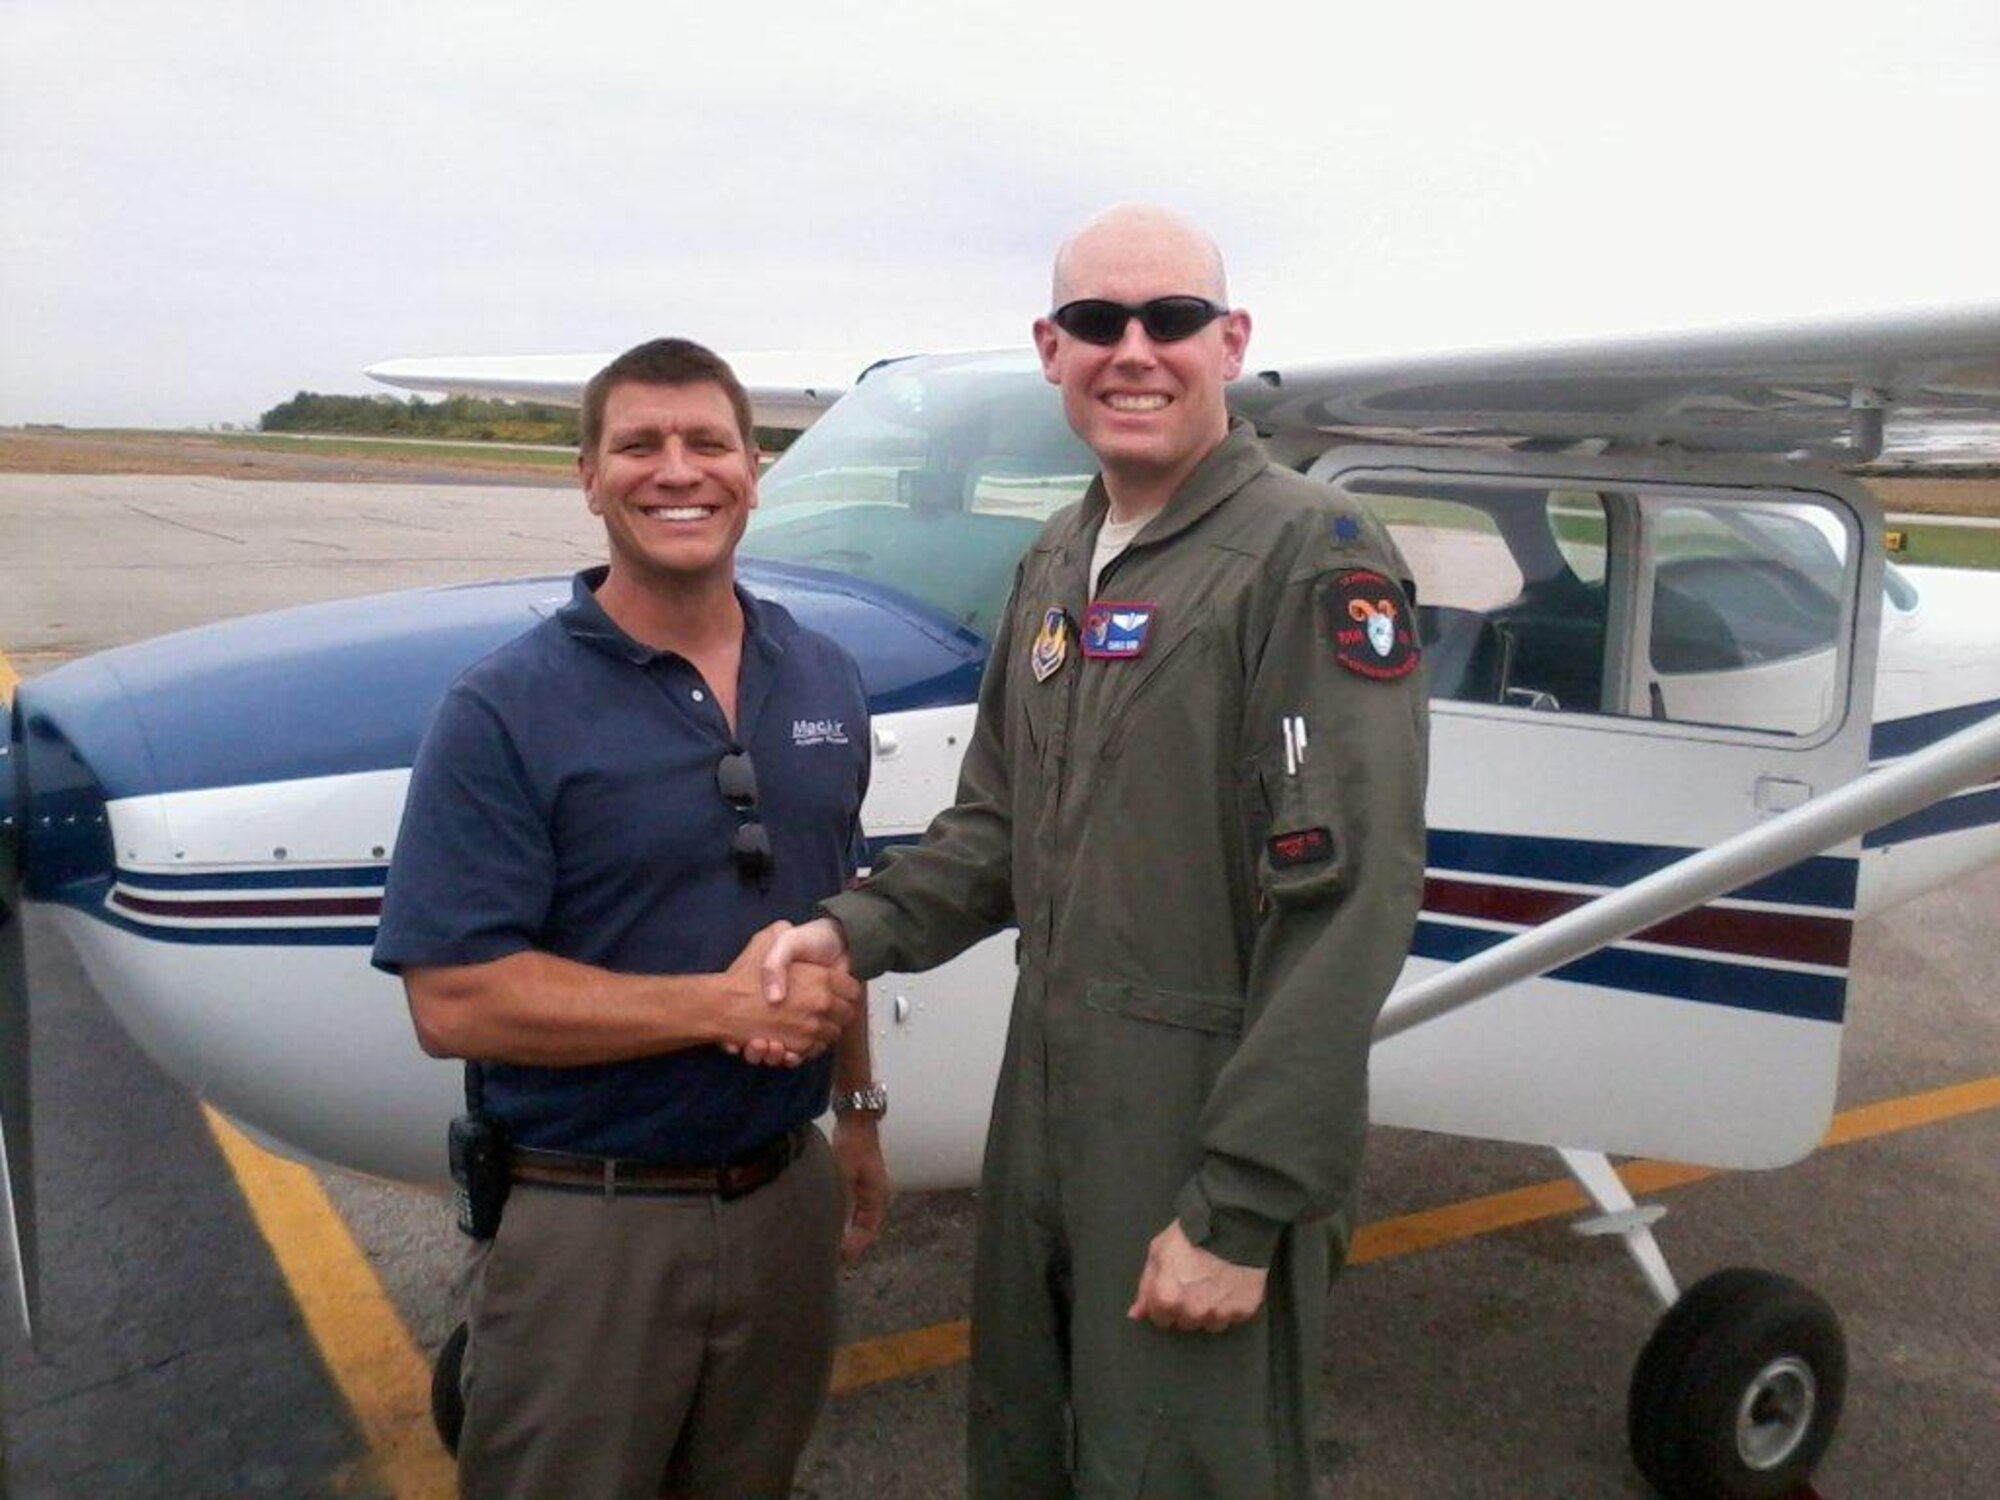 Lt. Col. (Dr.) Chris Bird and his flight instructor.